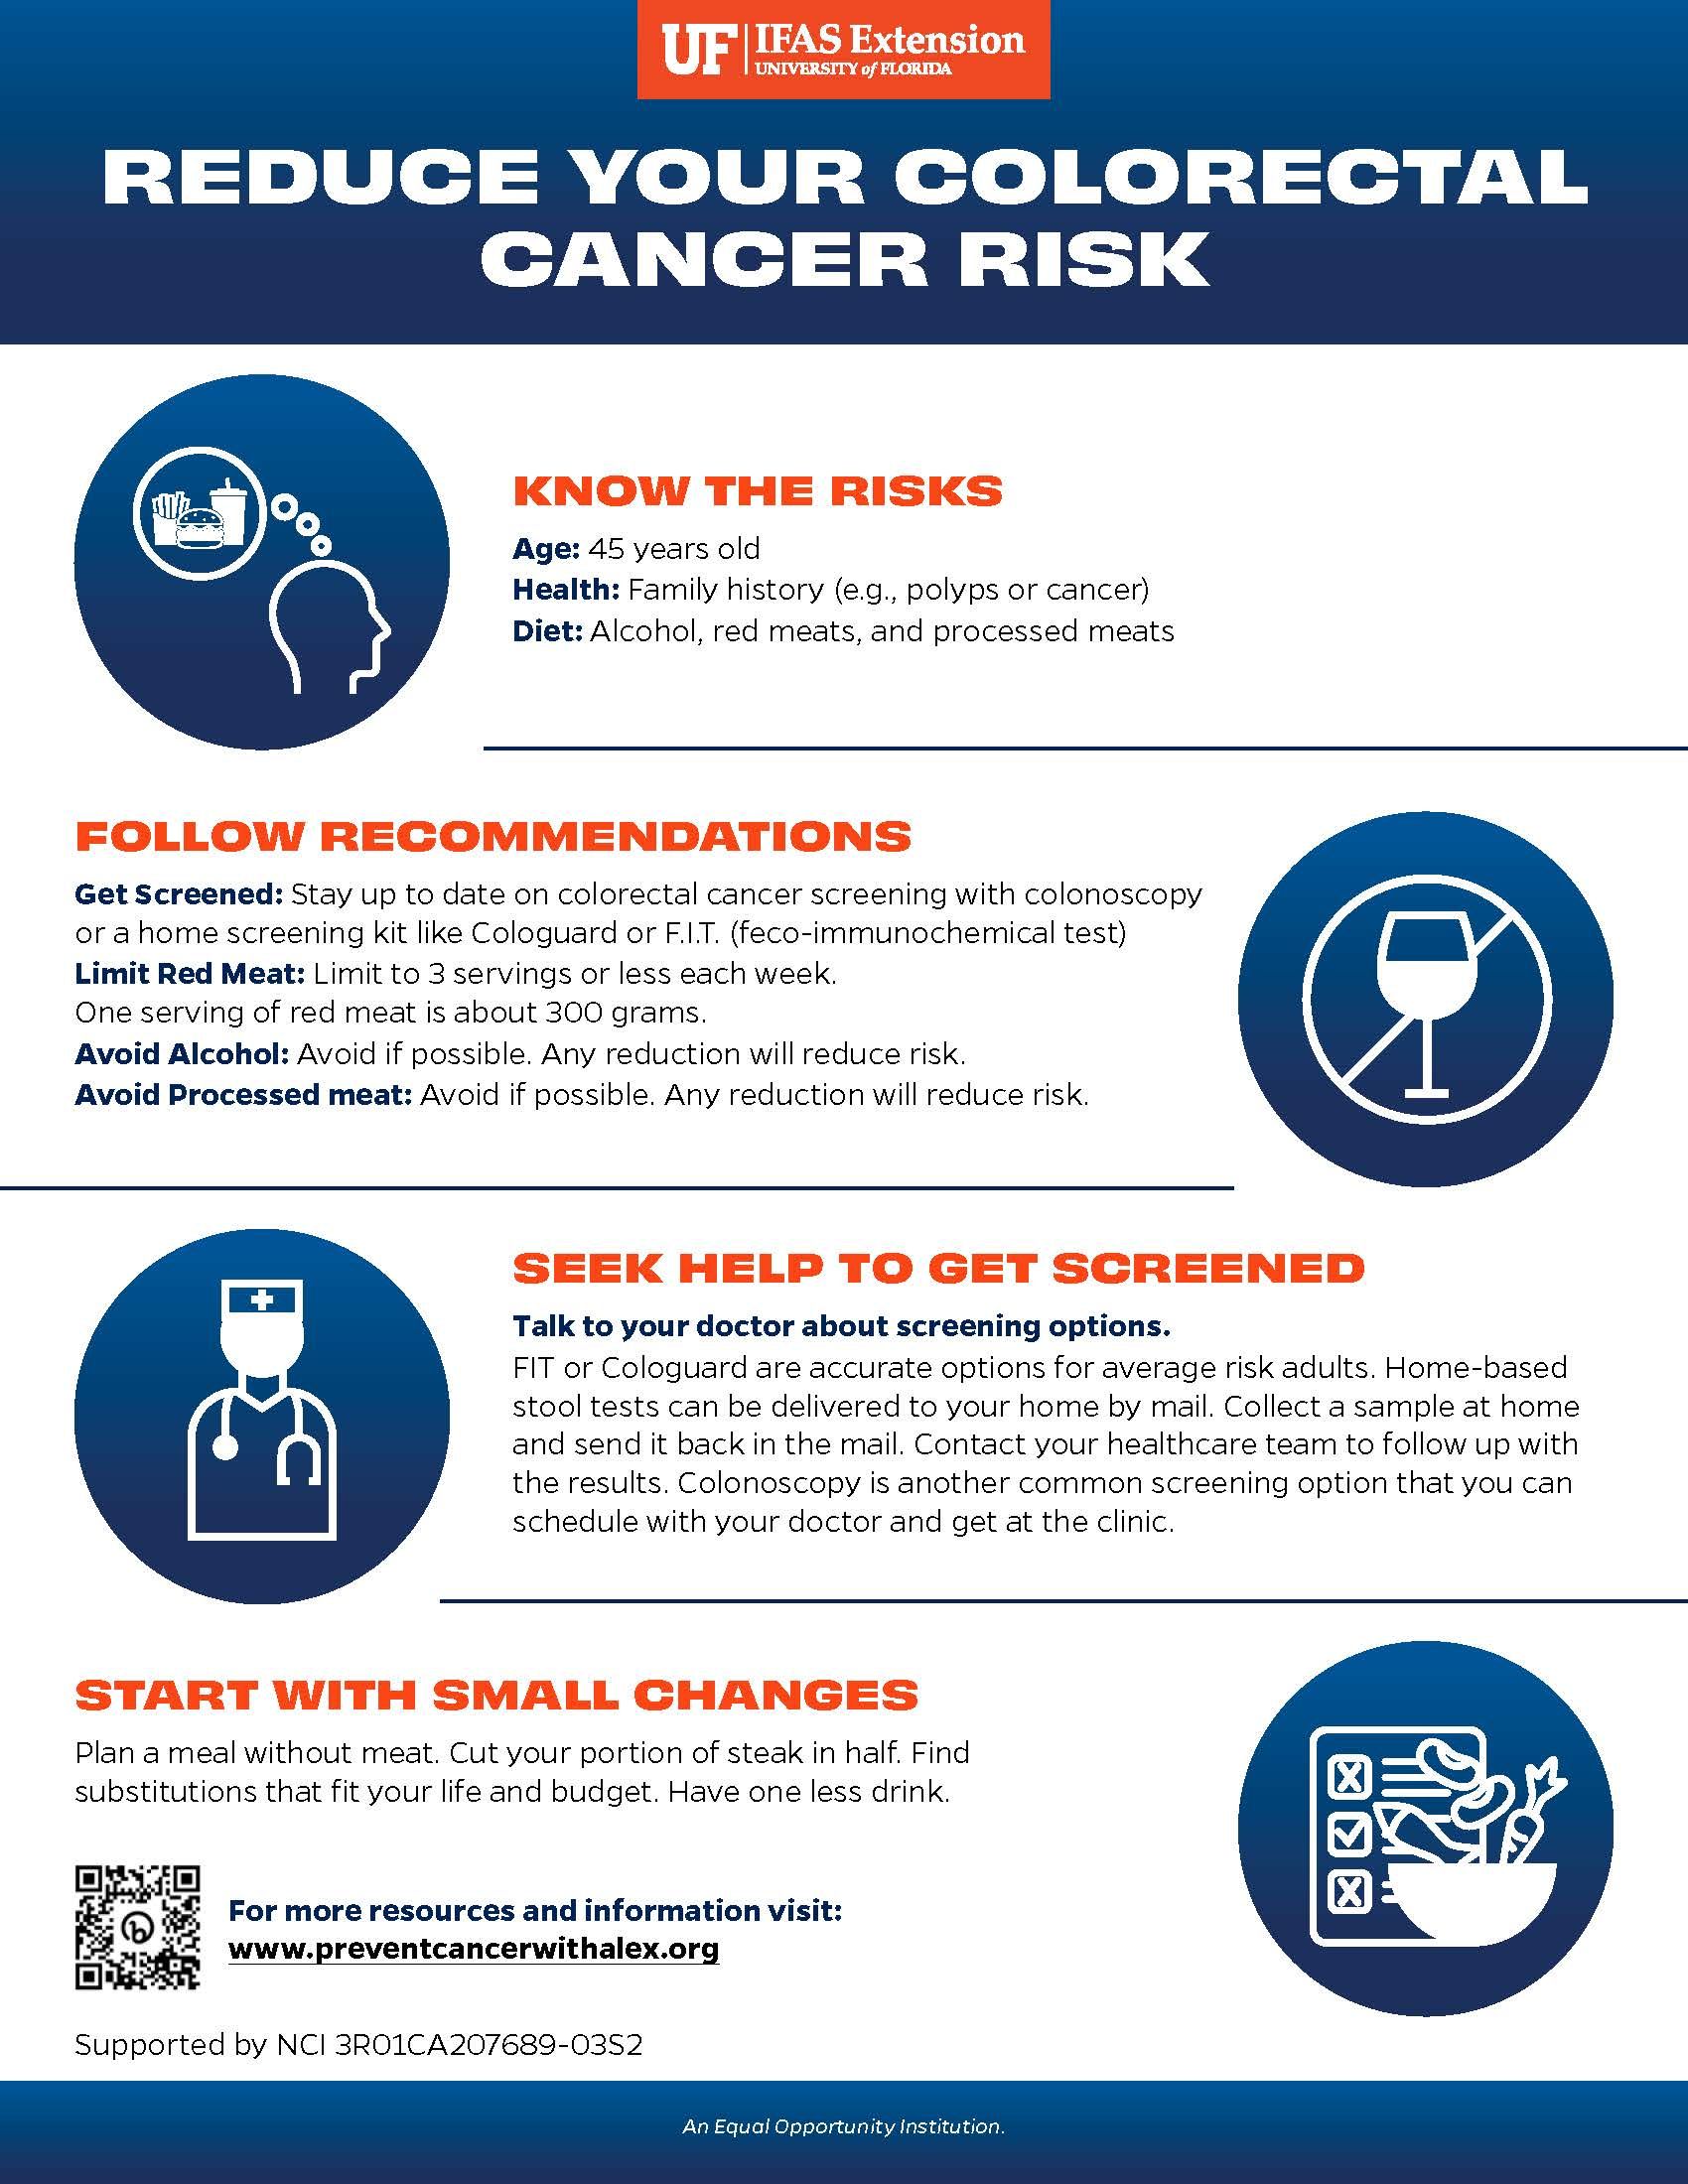 Reduce your colorectal cancer risk info graphic (Page 1).